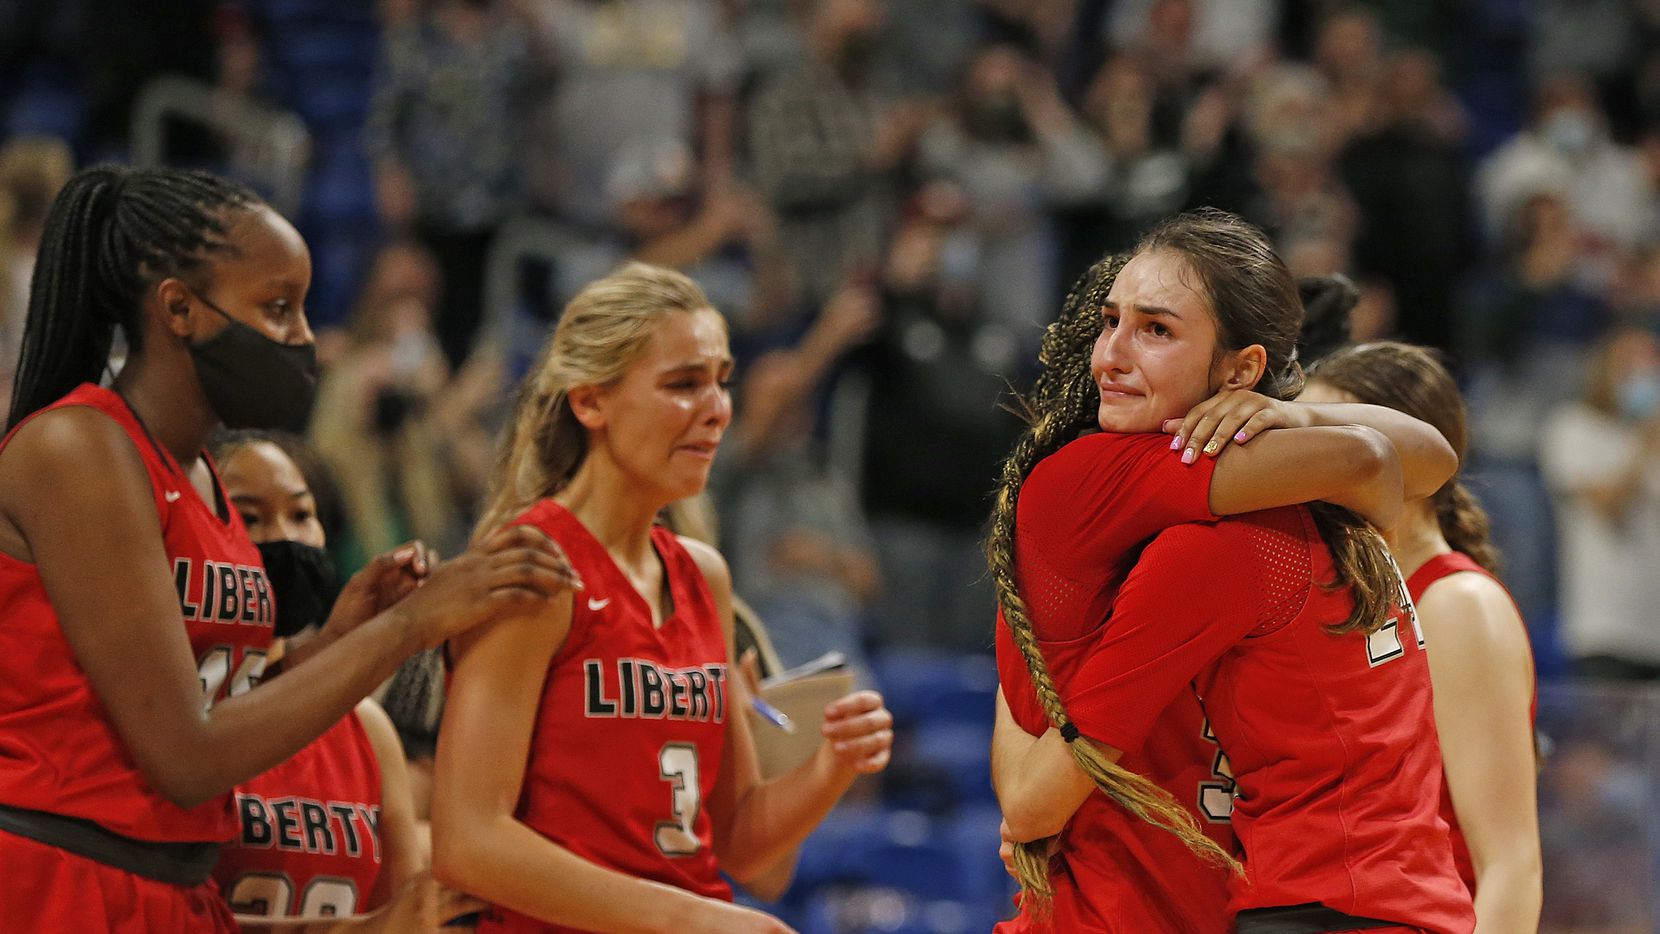 Frisco Liberty Maya Jain #24 hugs Frisco Liberty Jazzy Owens-Barnett #30 at the end of the game. Frisco Liberty vs. Cedar Park in girls basketball Class 5A state championship game on Wednesday, March 11, 2021 at the Alamodome. 